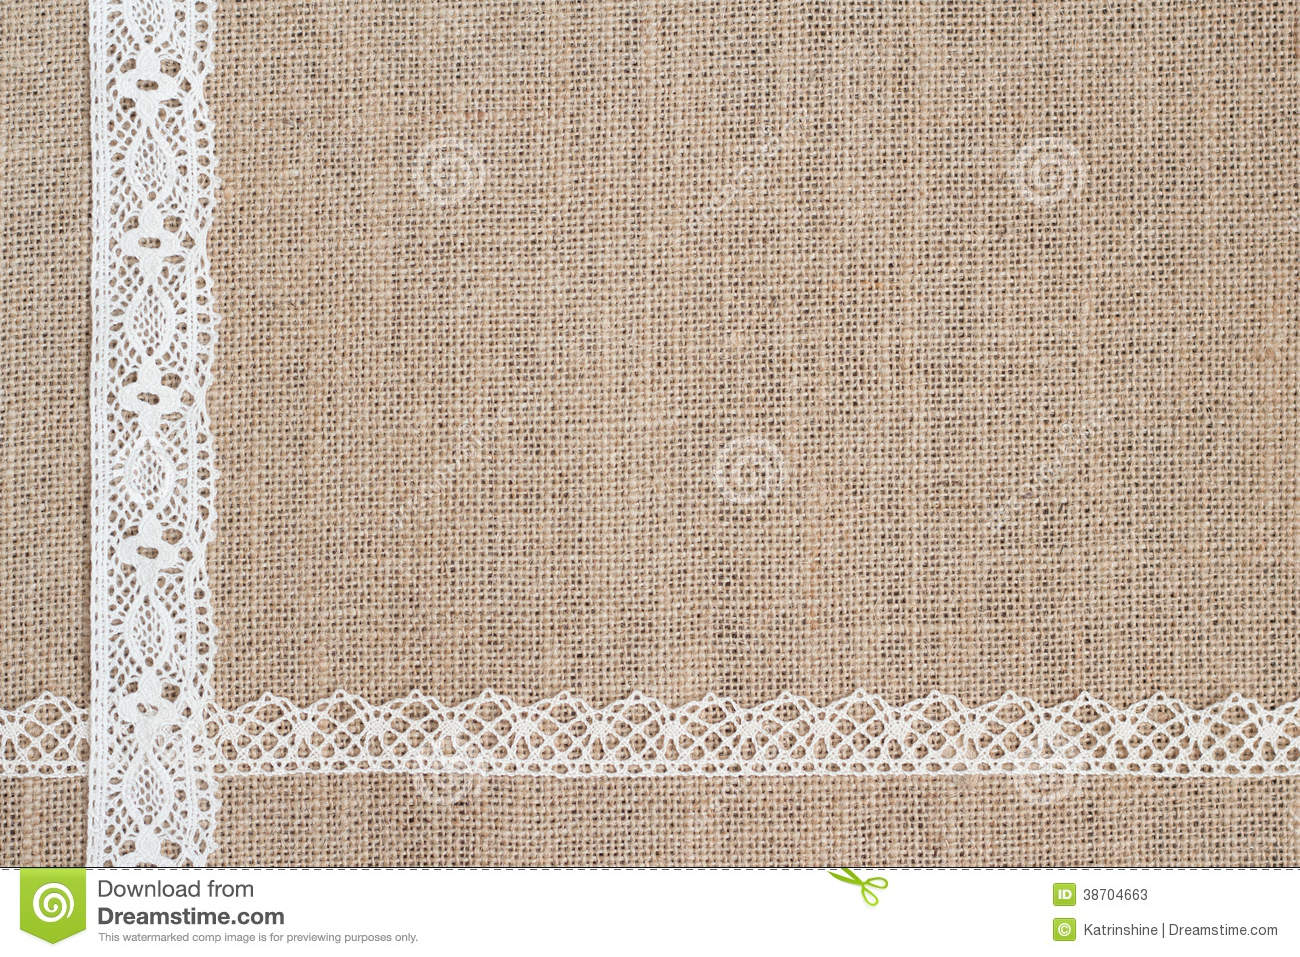 Burlap Background With Lace Stock Photos   Image  38704663